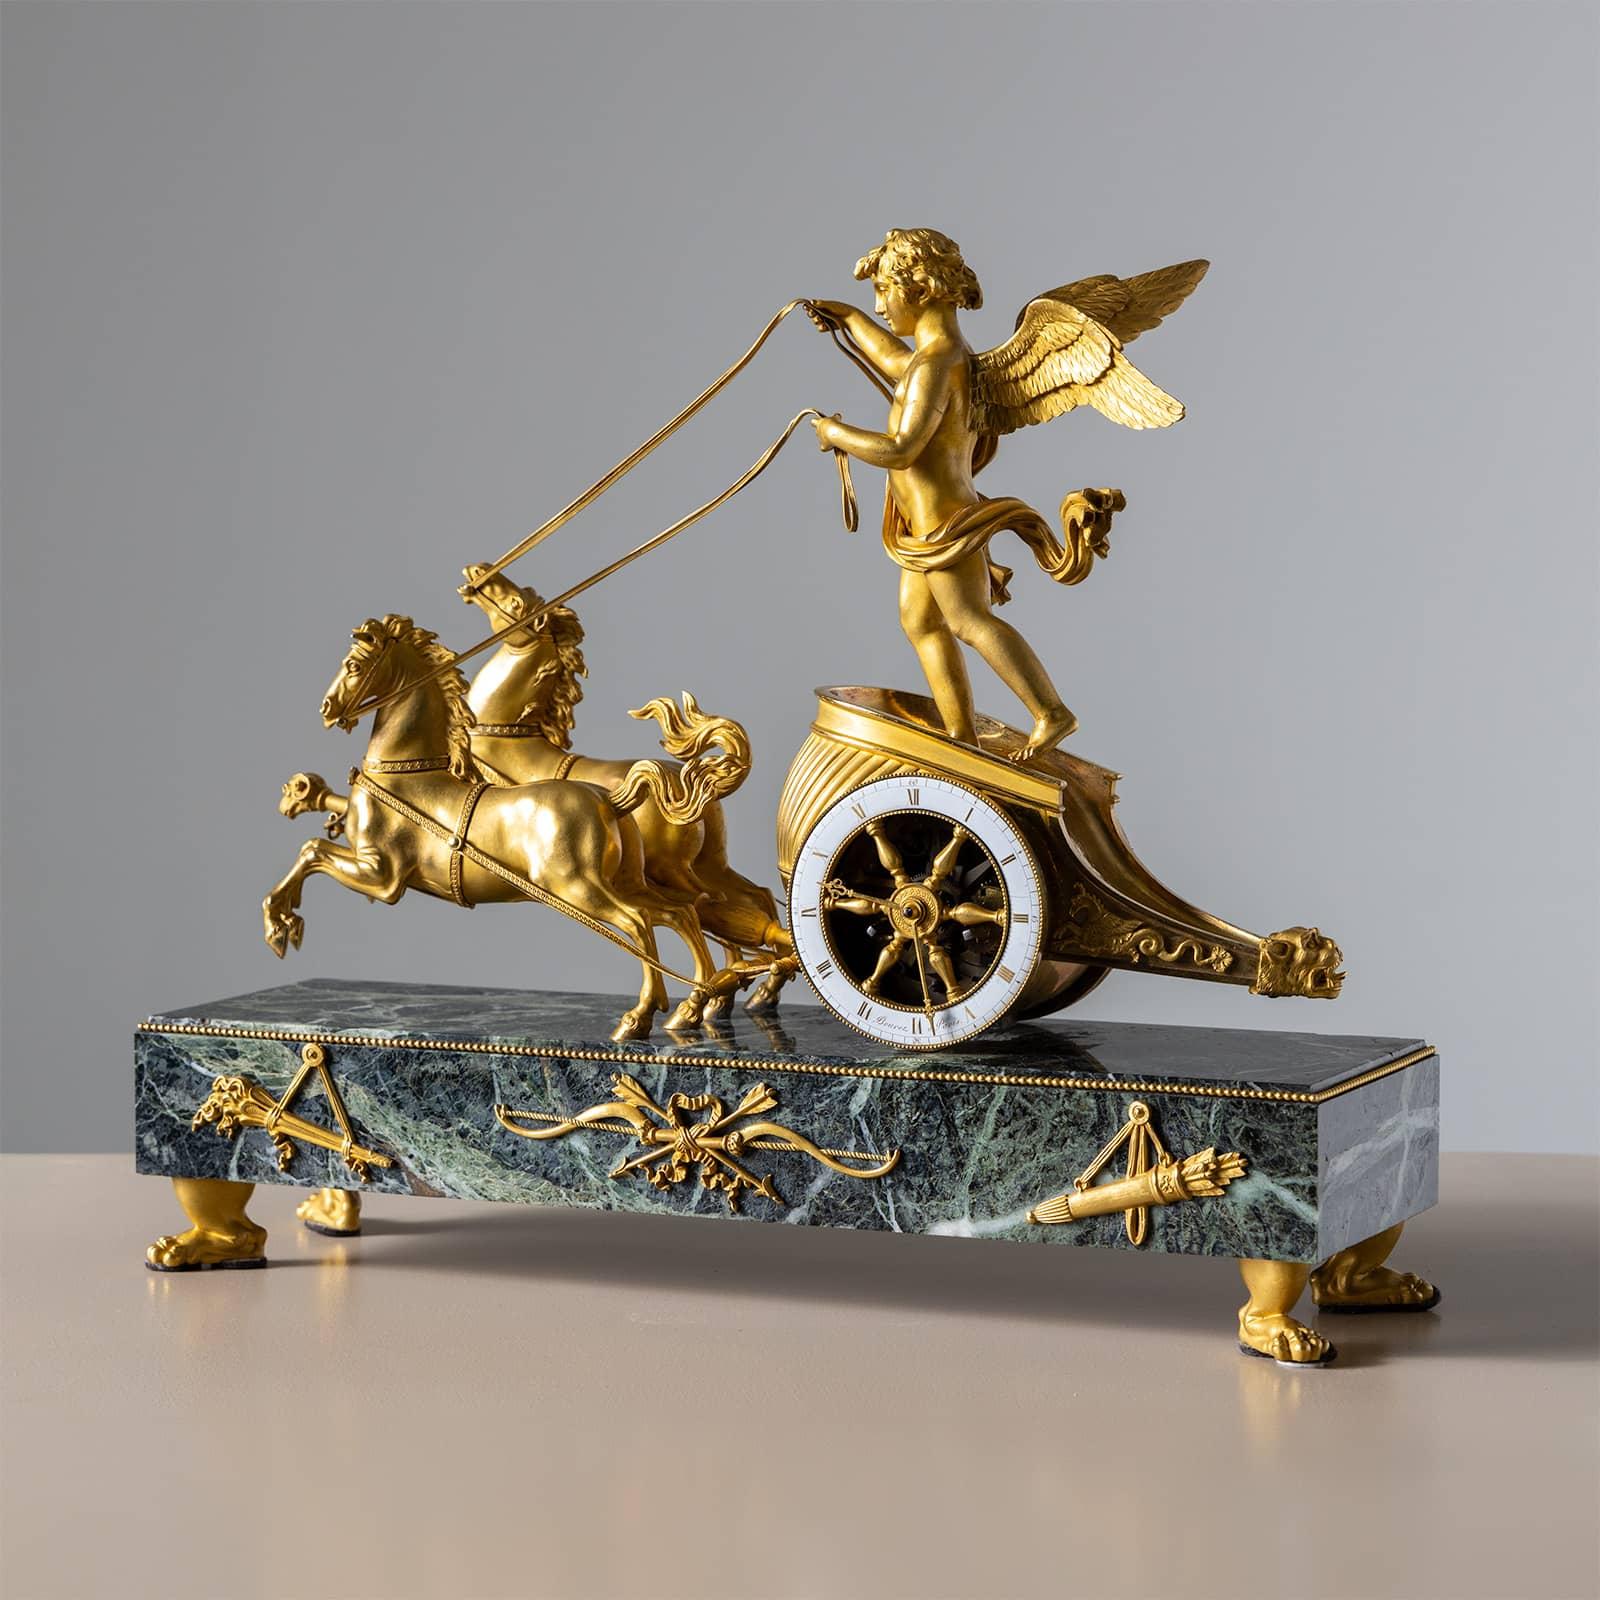 French mantel clock crafted from fire-gilt bronze, featuring a green marble plinth supported by paw feet. Atop the clock sits Cupid, depicted as a charioteer riding a two-horse chariot with dynamic motion. The clockwork is housed within the chariot,